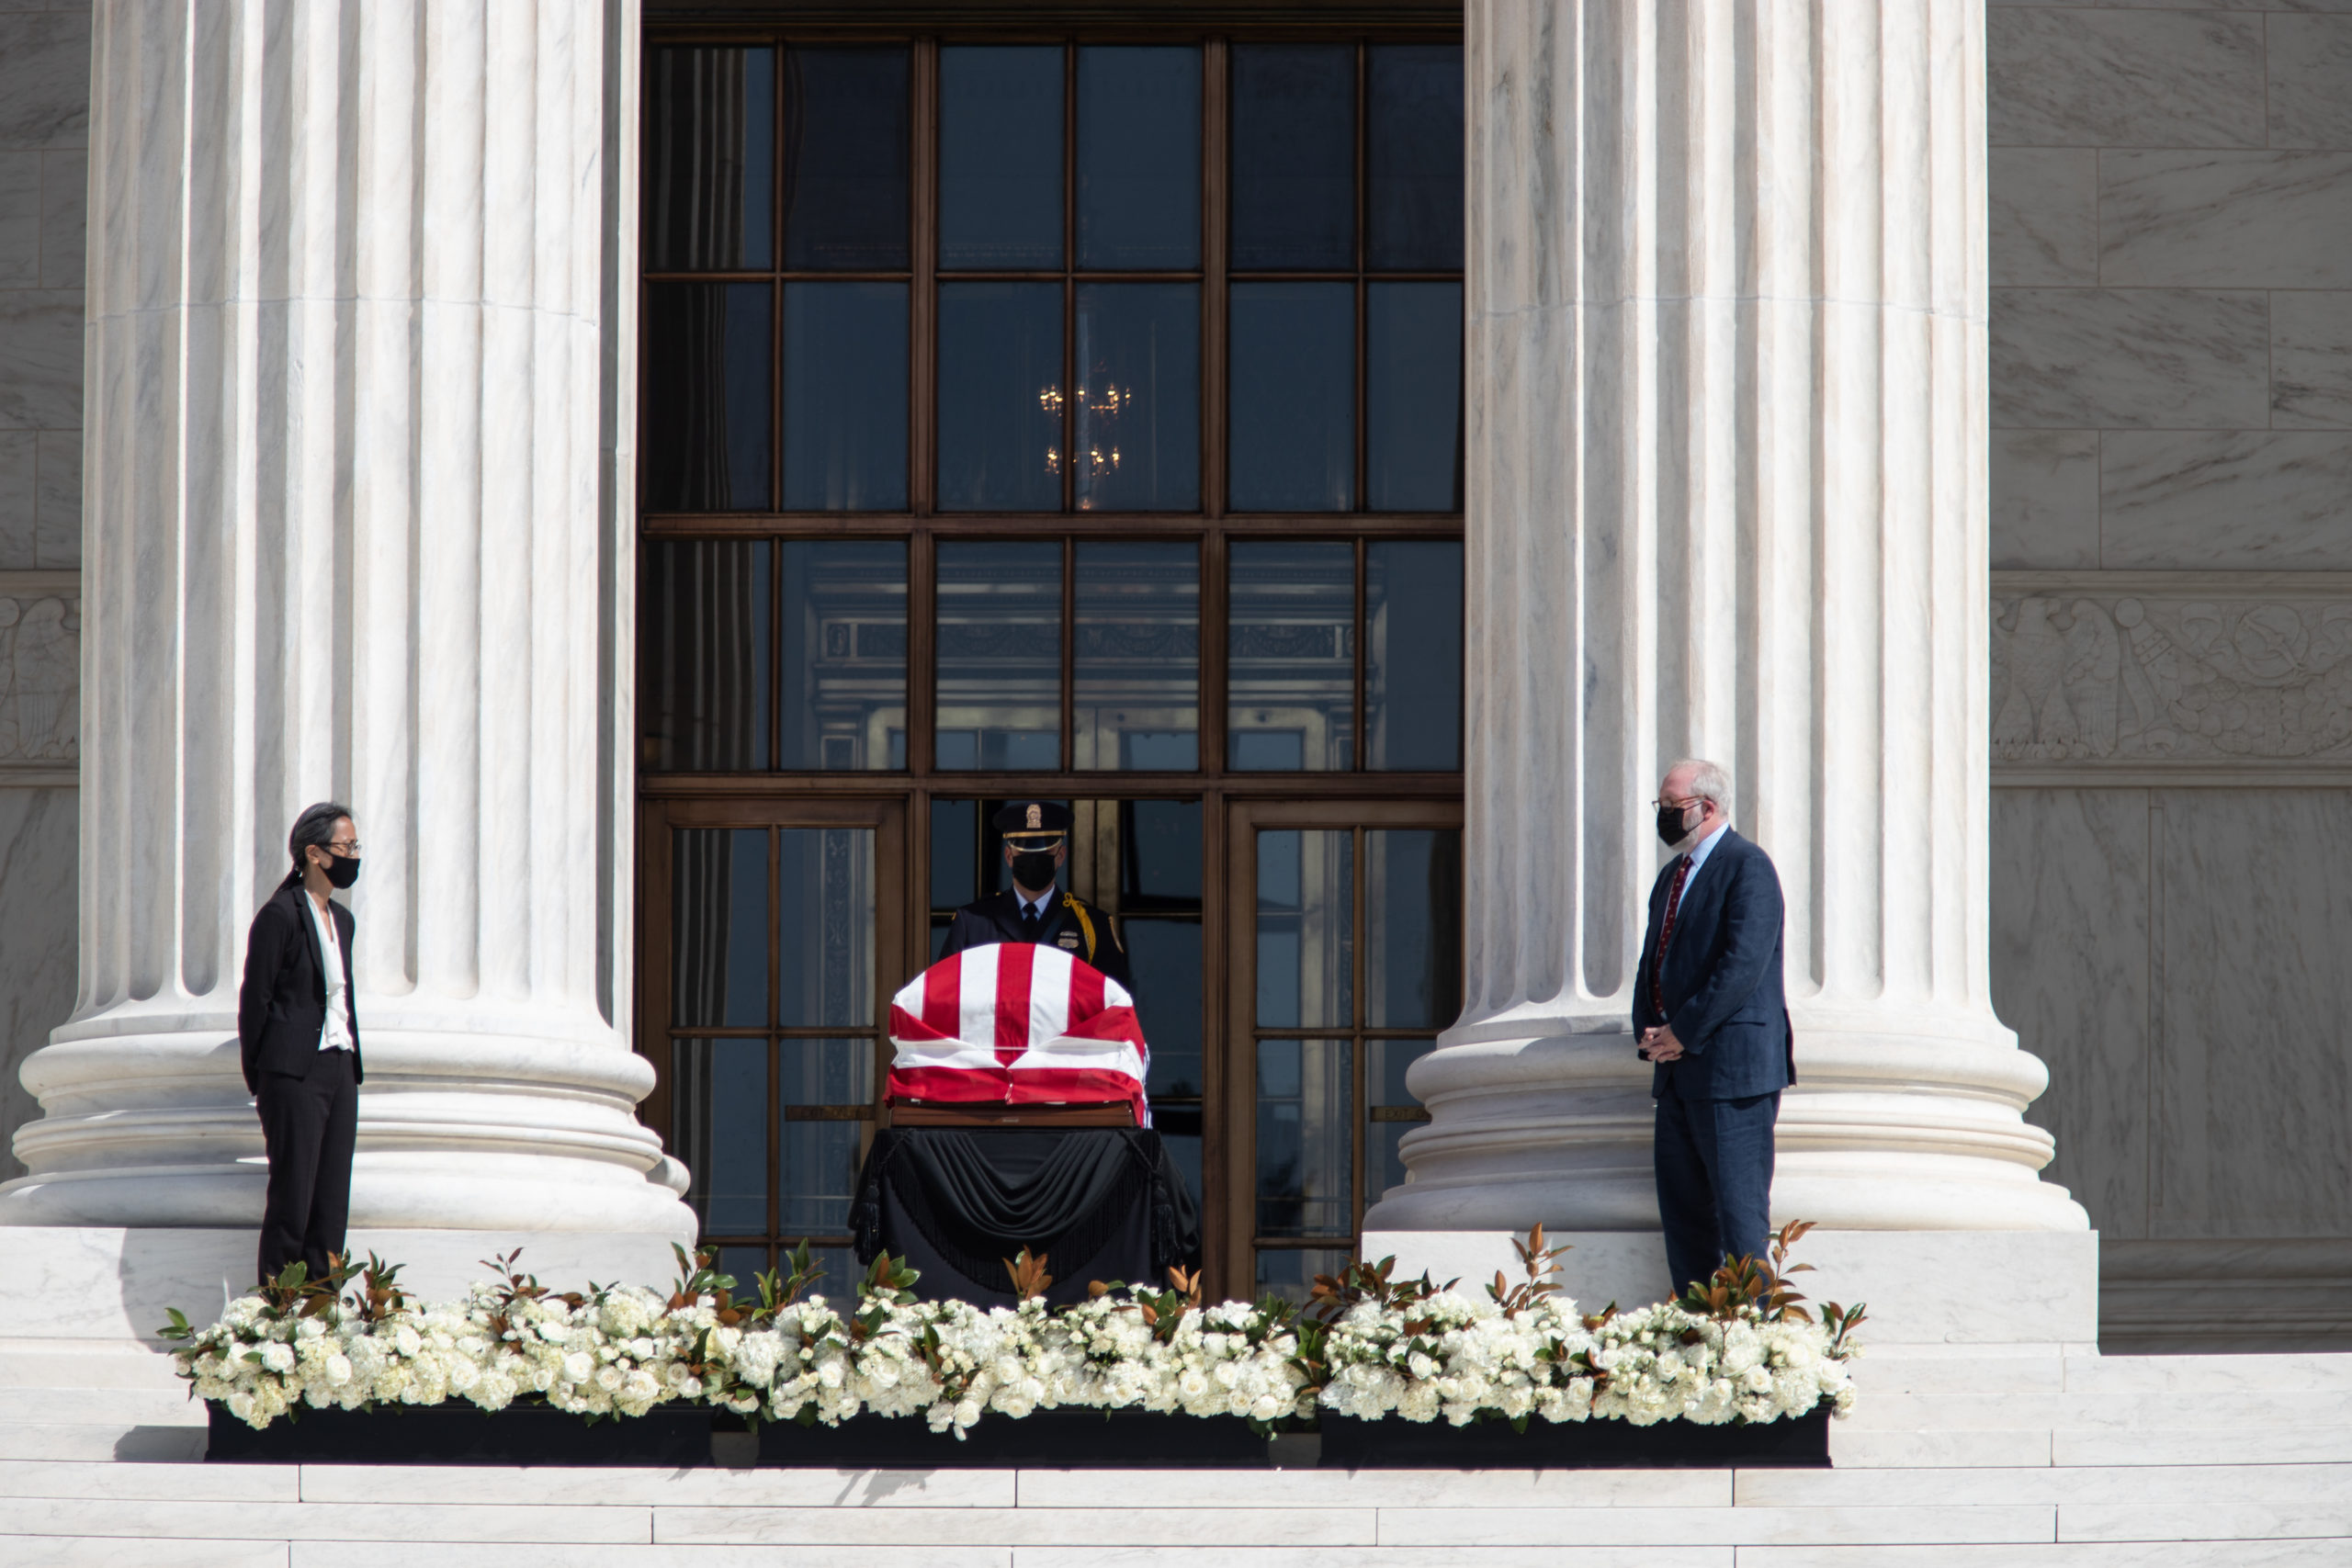 Ruth Bader Ginsburg's flag-draped casket lies in repose on the steps of the Supreme Court for the public to pay respects on Sept. 23, 2020. (Photo: Kaylee Greenlee / DCNF)